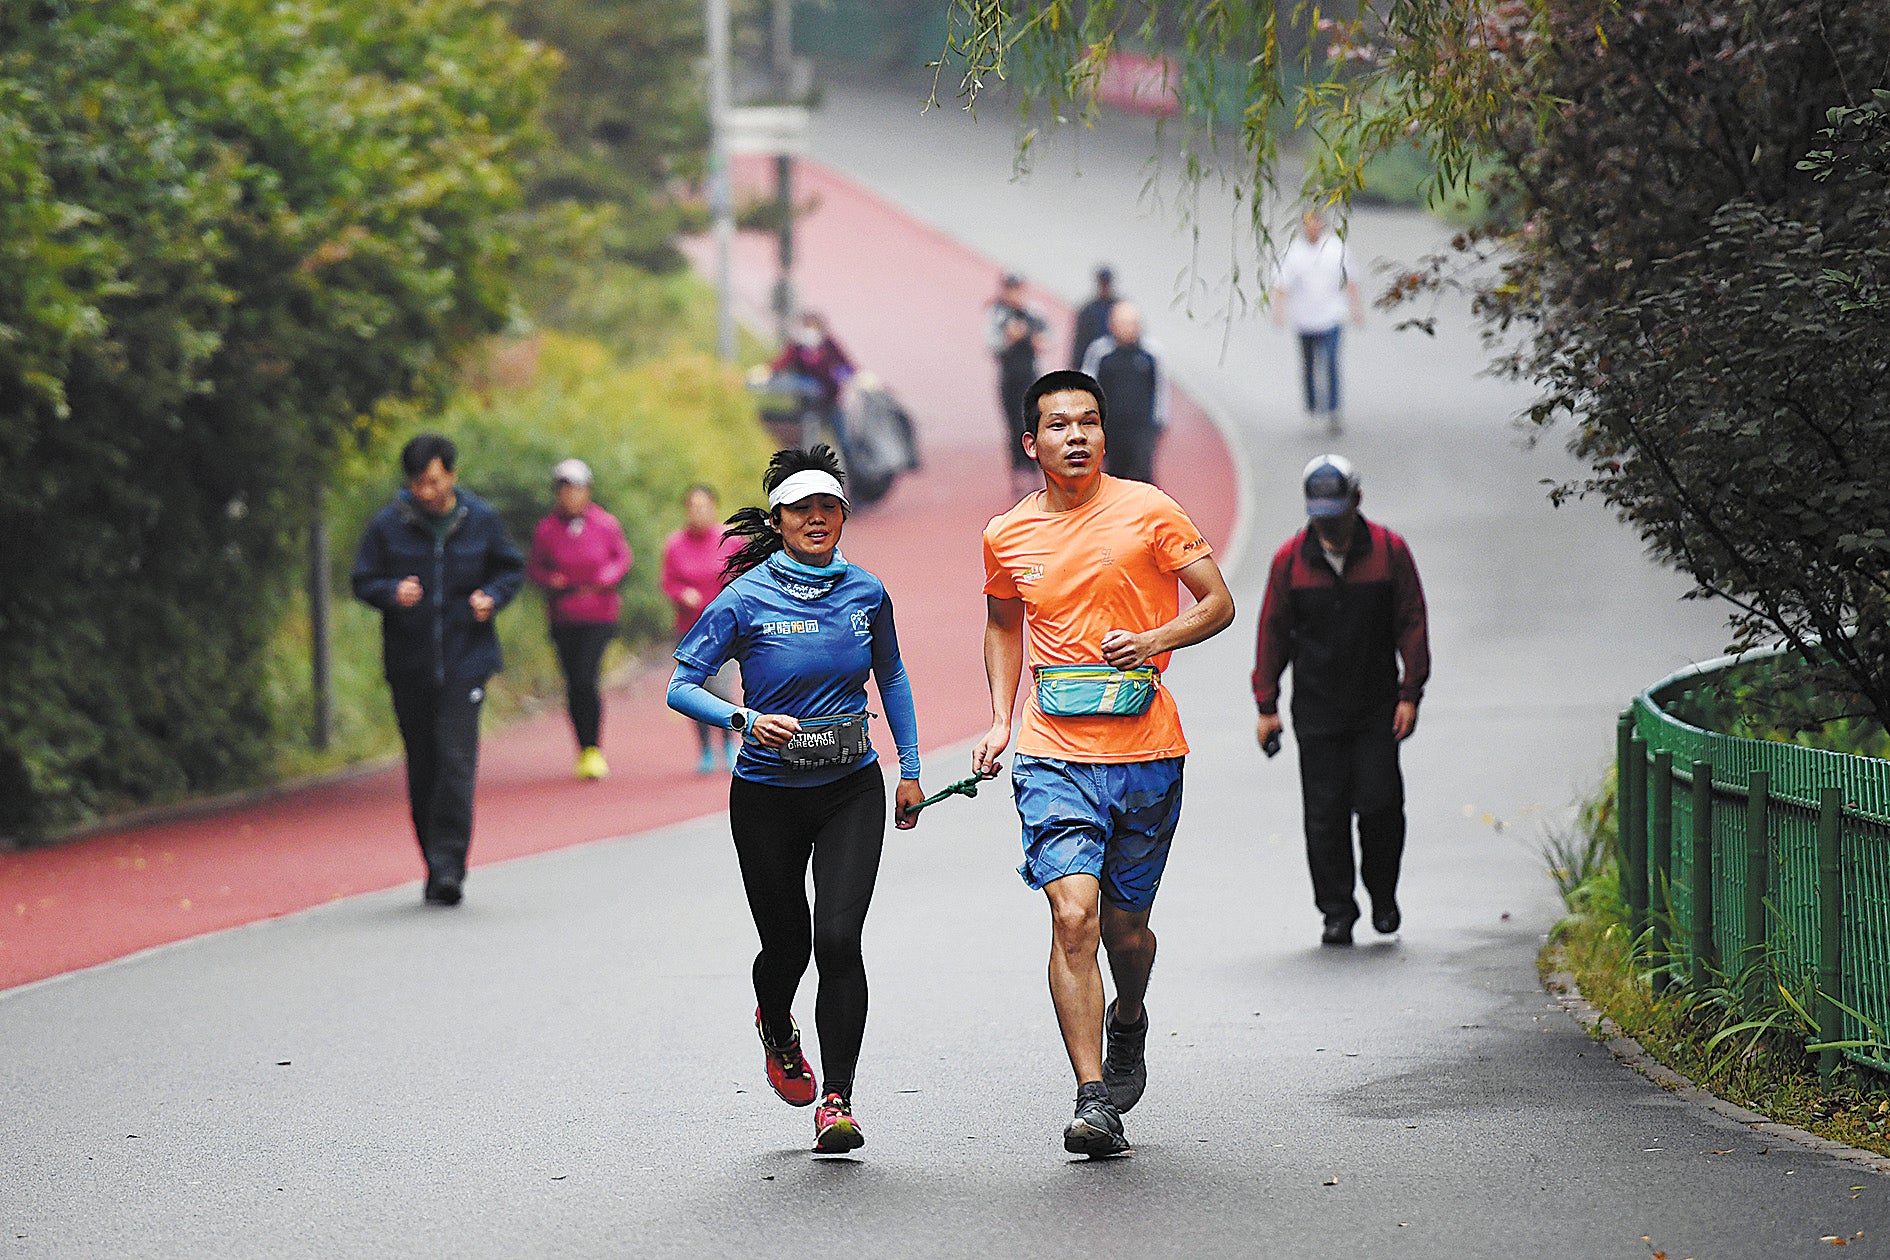 The Beijing branch of Running in the Dark holds regular sessions for members at Olympic Forest Park